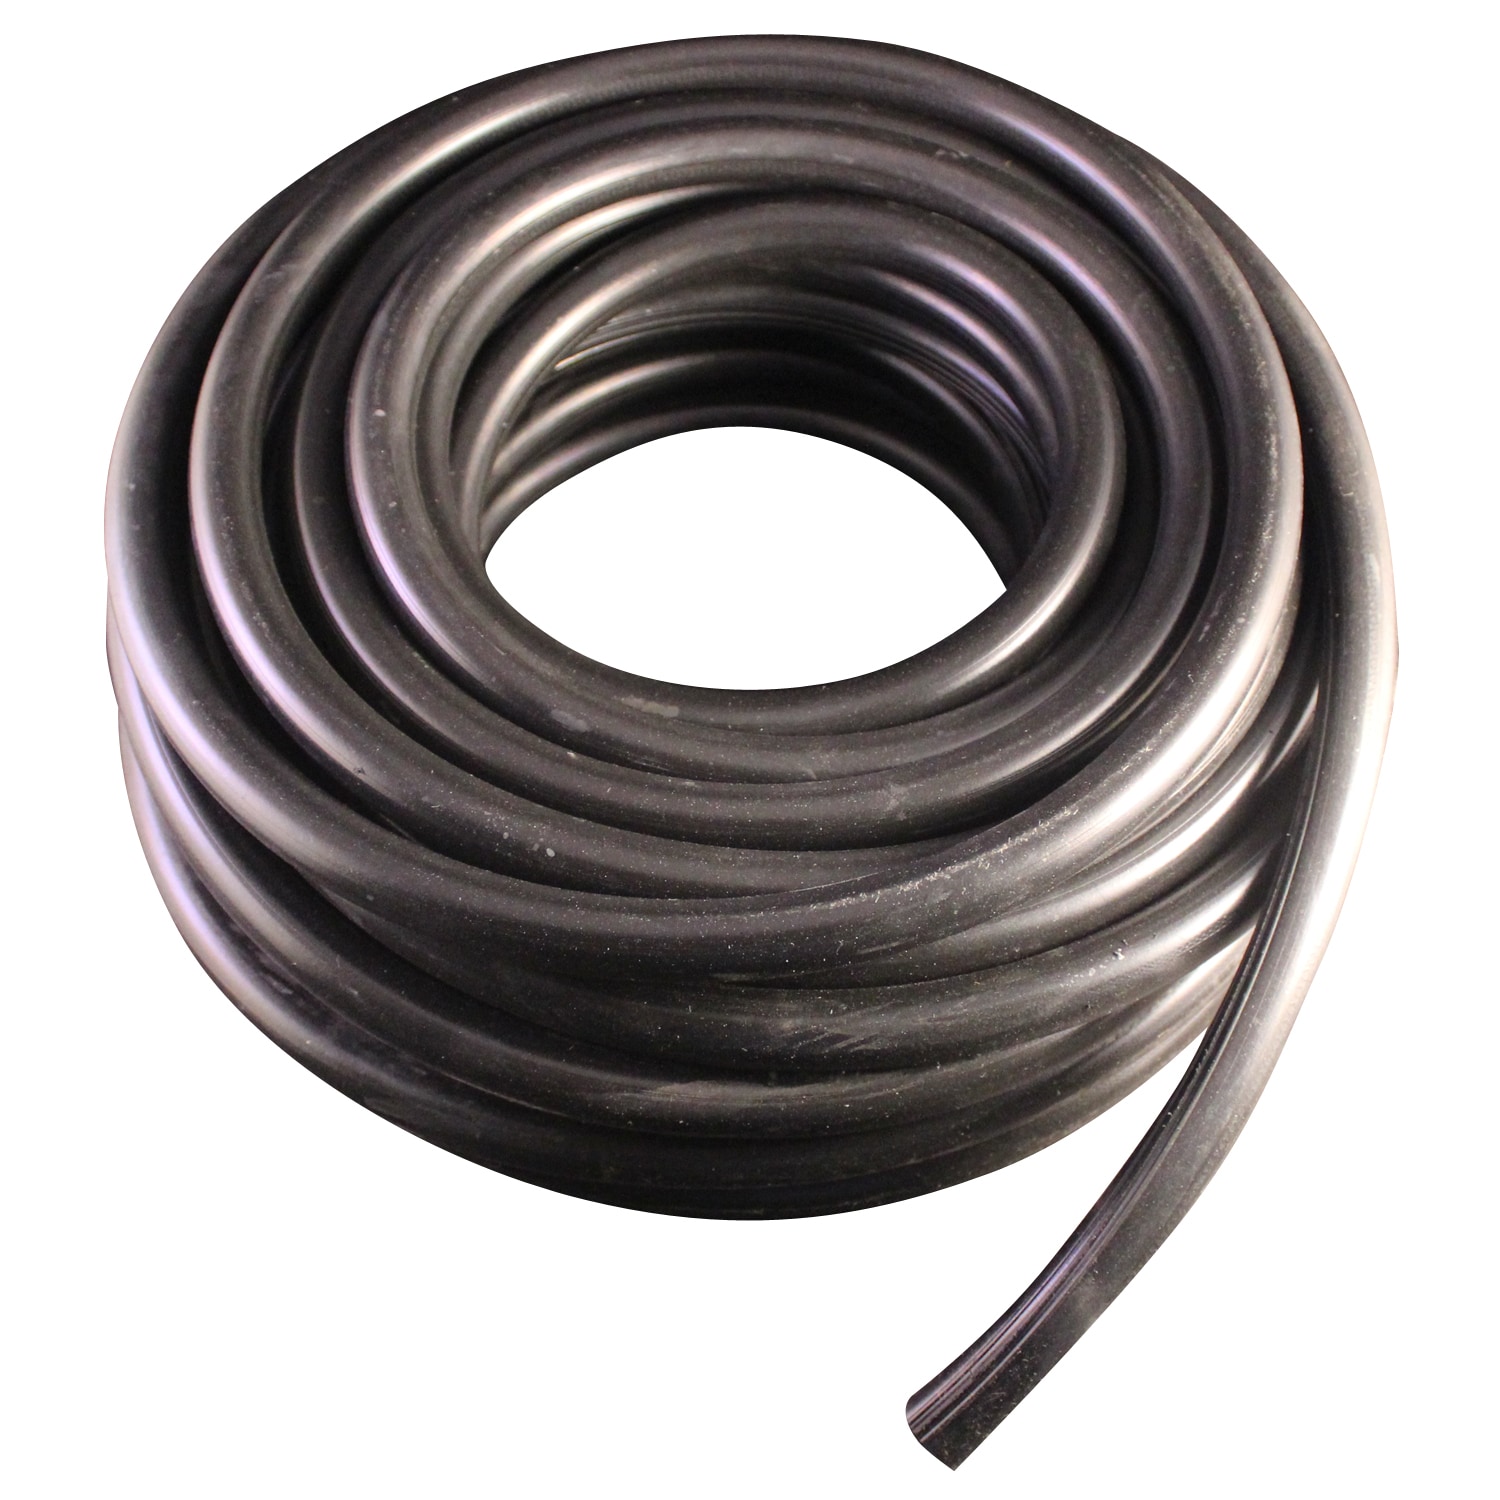 Milton Industrial Jackhammer 50’ Rubber Air Hose with 3/4